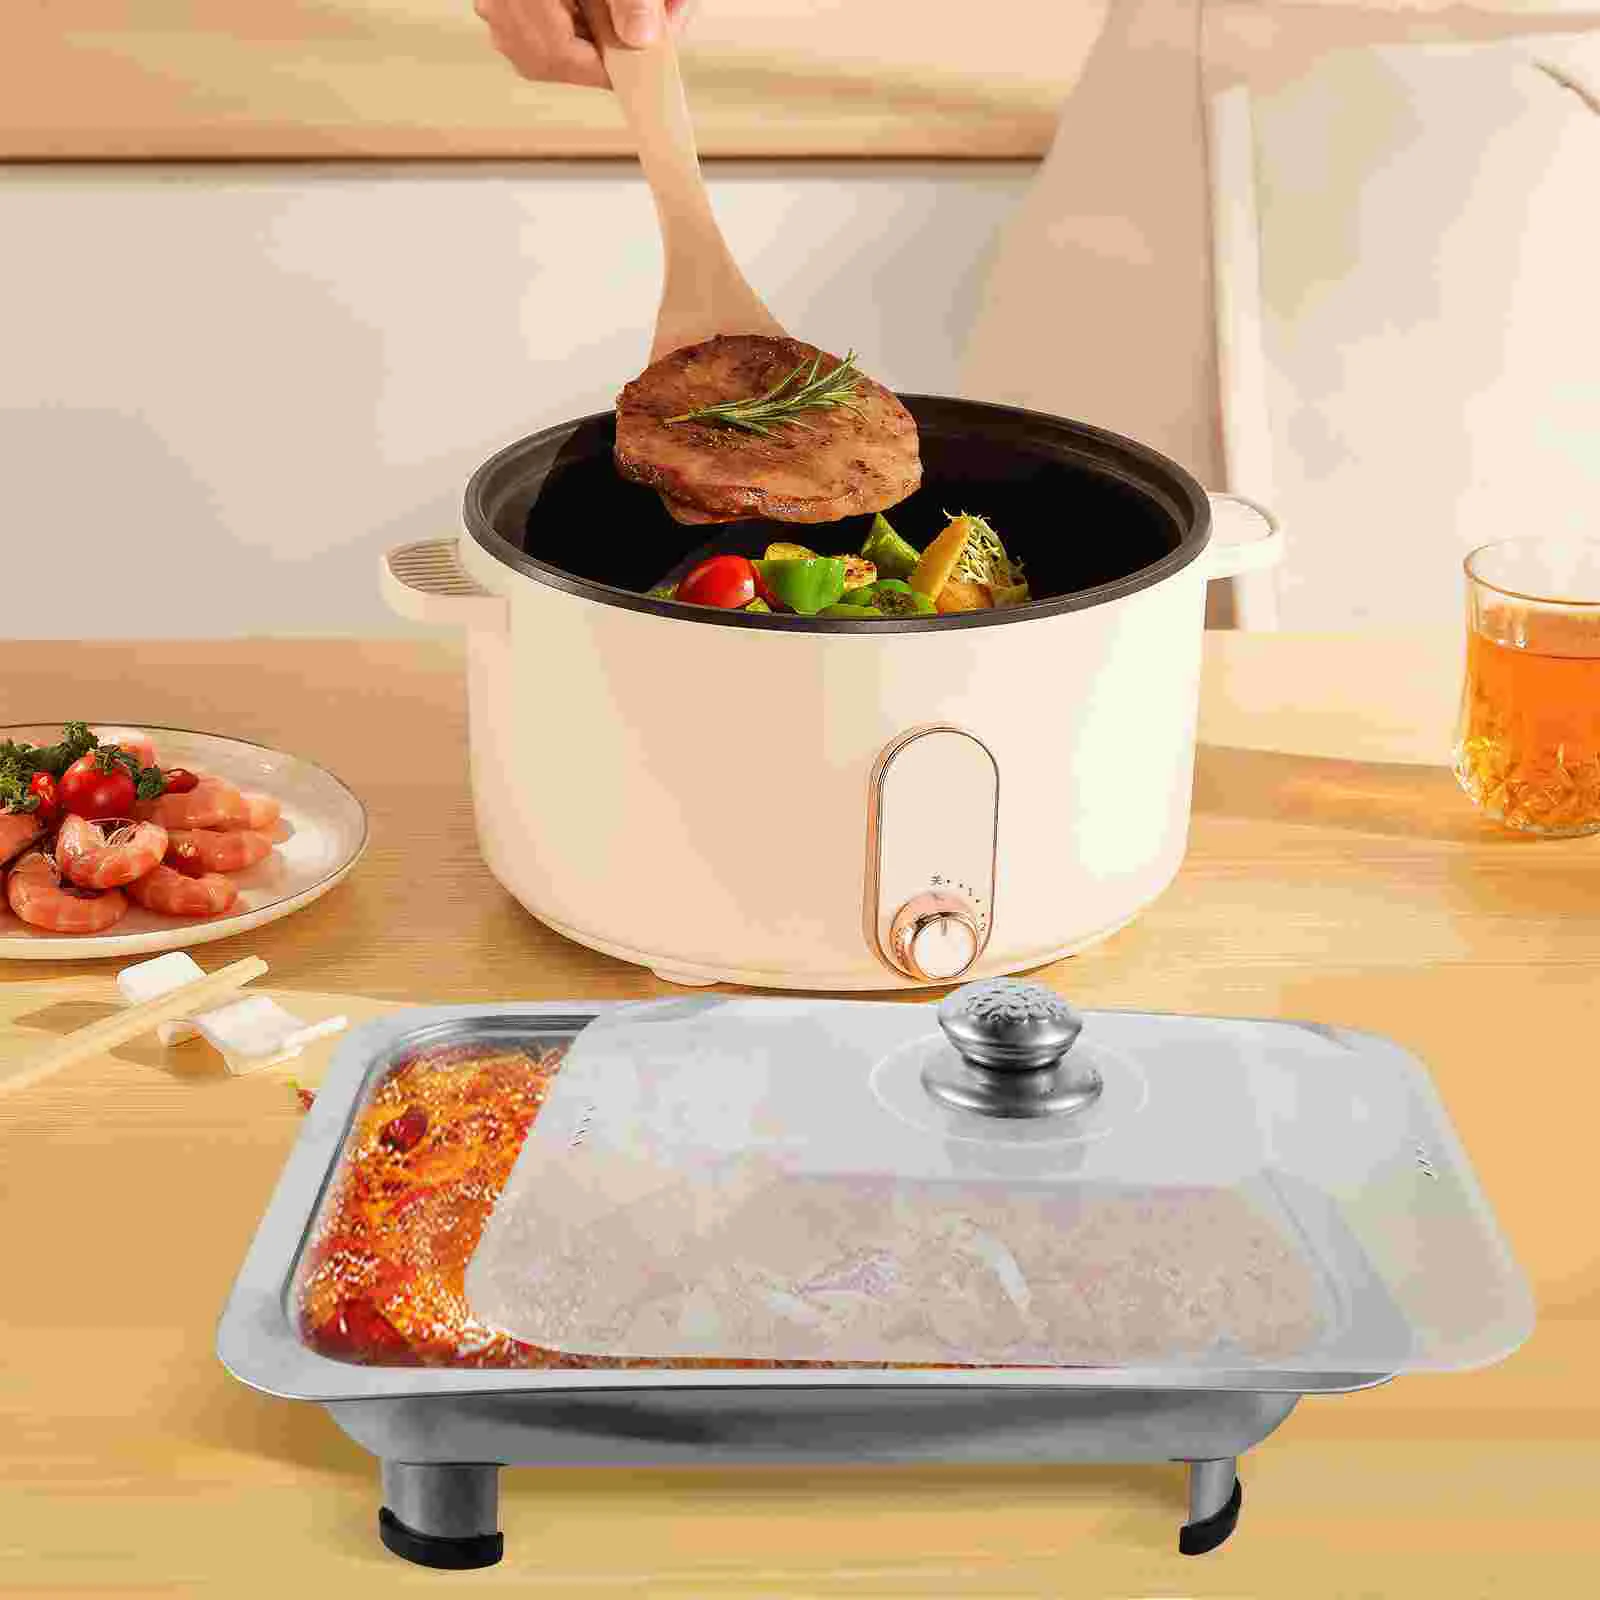 

Chafing Dish Buffet Set Stainless Steel Rectangular Chafers Cover Lid Buffet Server Food Warmer Catering Pan Hot Steam